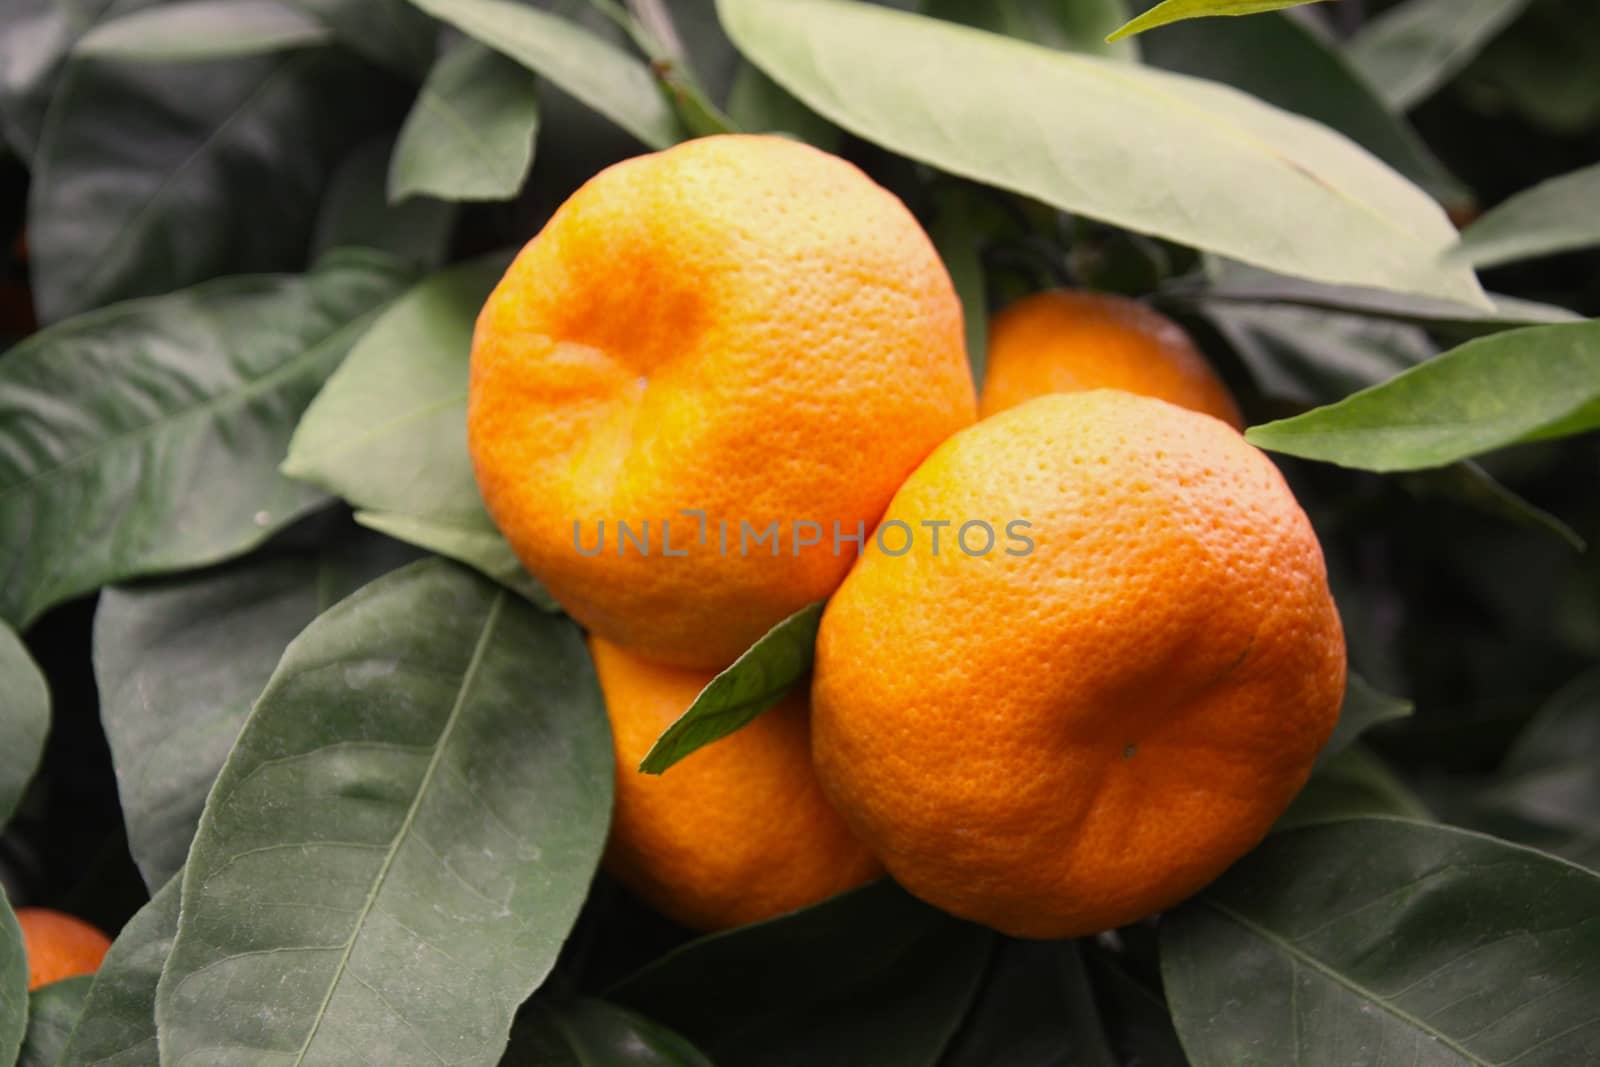 Ripe tangerines on a tree and green leaves